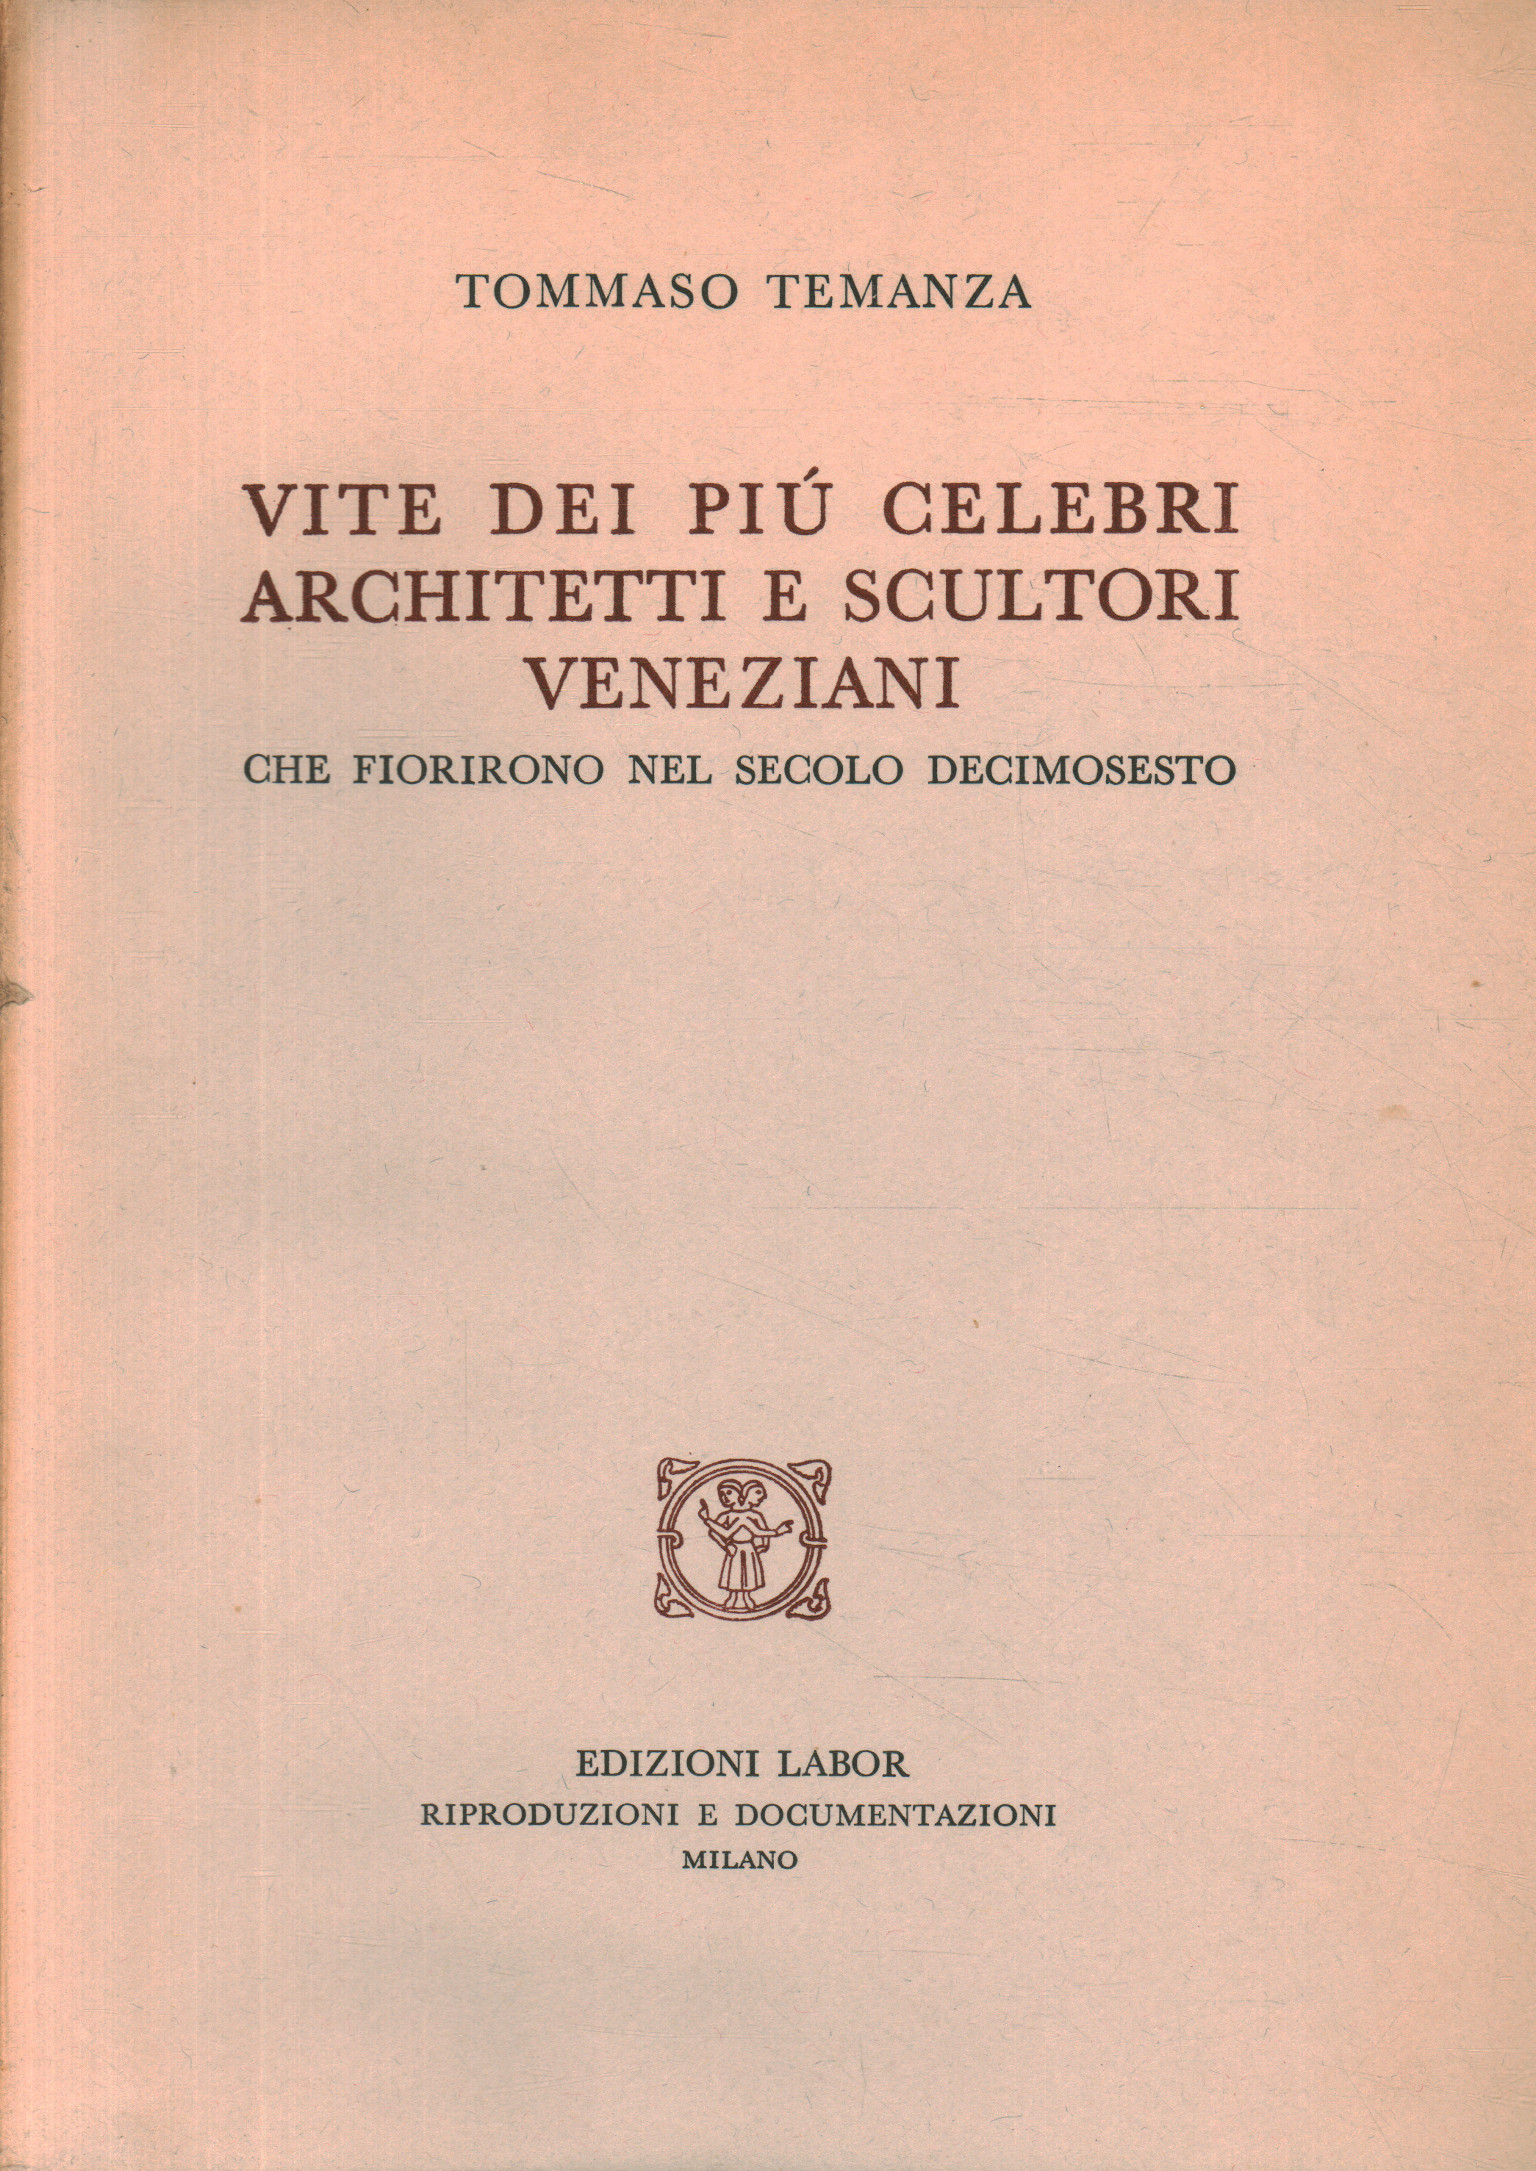 Lives of the most famous architects and% 2, Lives of the most famous architects and% 2